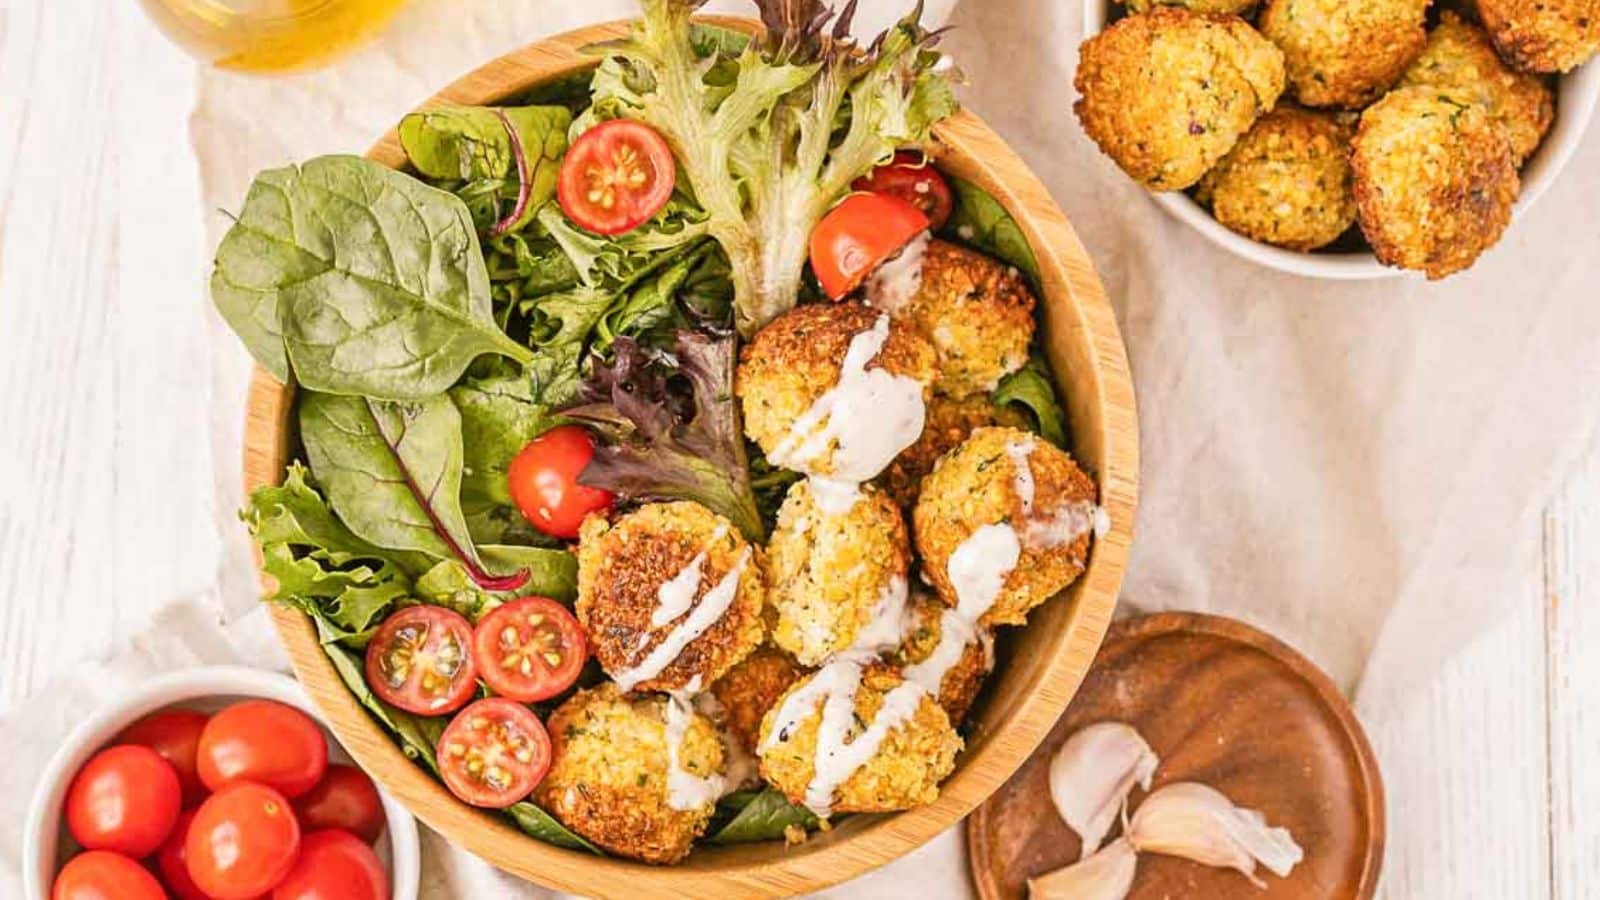 <p>On the face of it, it’s a classic Falafel Bowl, but dig a little deeper, there’s tahini subtly enhancing the bowl’s richness. A simple ingredient that makes all the difference and enhances the whole heartiness of the dish.<br><strong>Get the Recipe: </strong><a href="https://twocityvegans.com/easy-vegan-falafel-bowl/?utm_source=msn&utm_medium=page&utm_campaign=msn" rel="noopener">Easy Vegan Falafel Bowl</a></p>